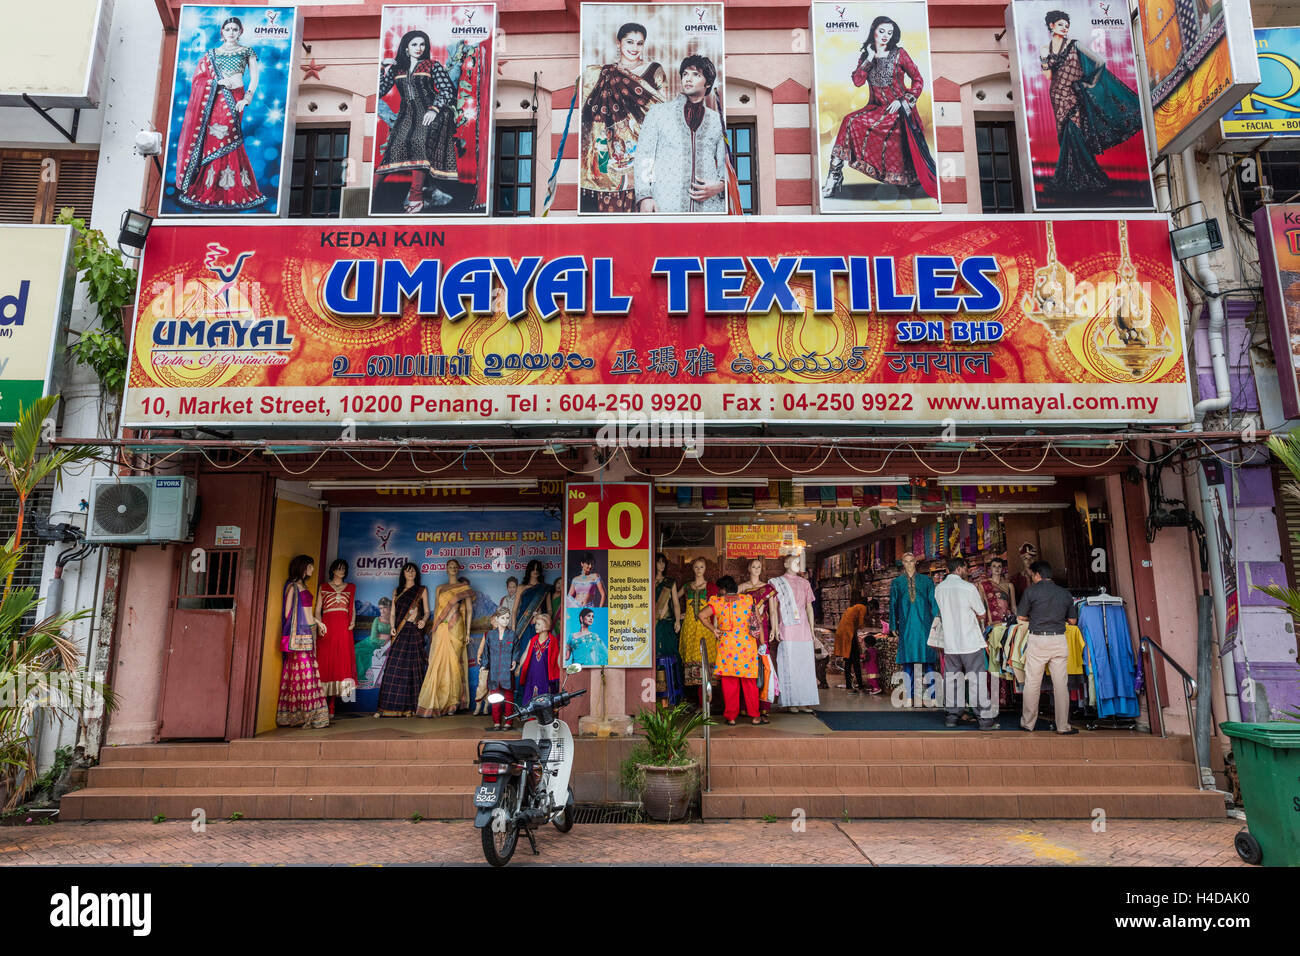 Impressions Little India, Georgetown, Penang, Malaysia, Kedah, town view, urban lives, people, textiles, clothes Stock Photo